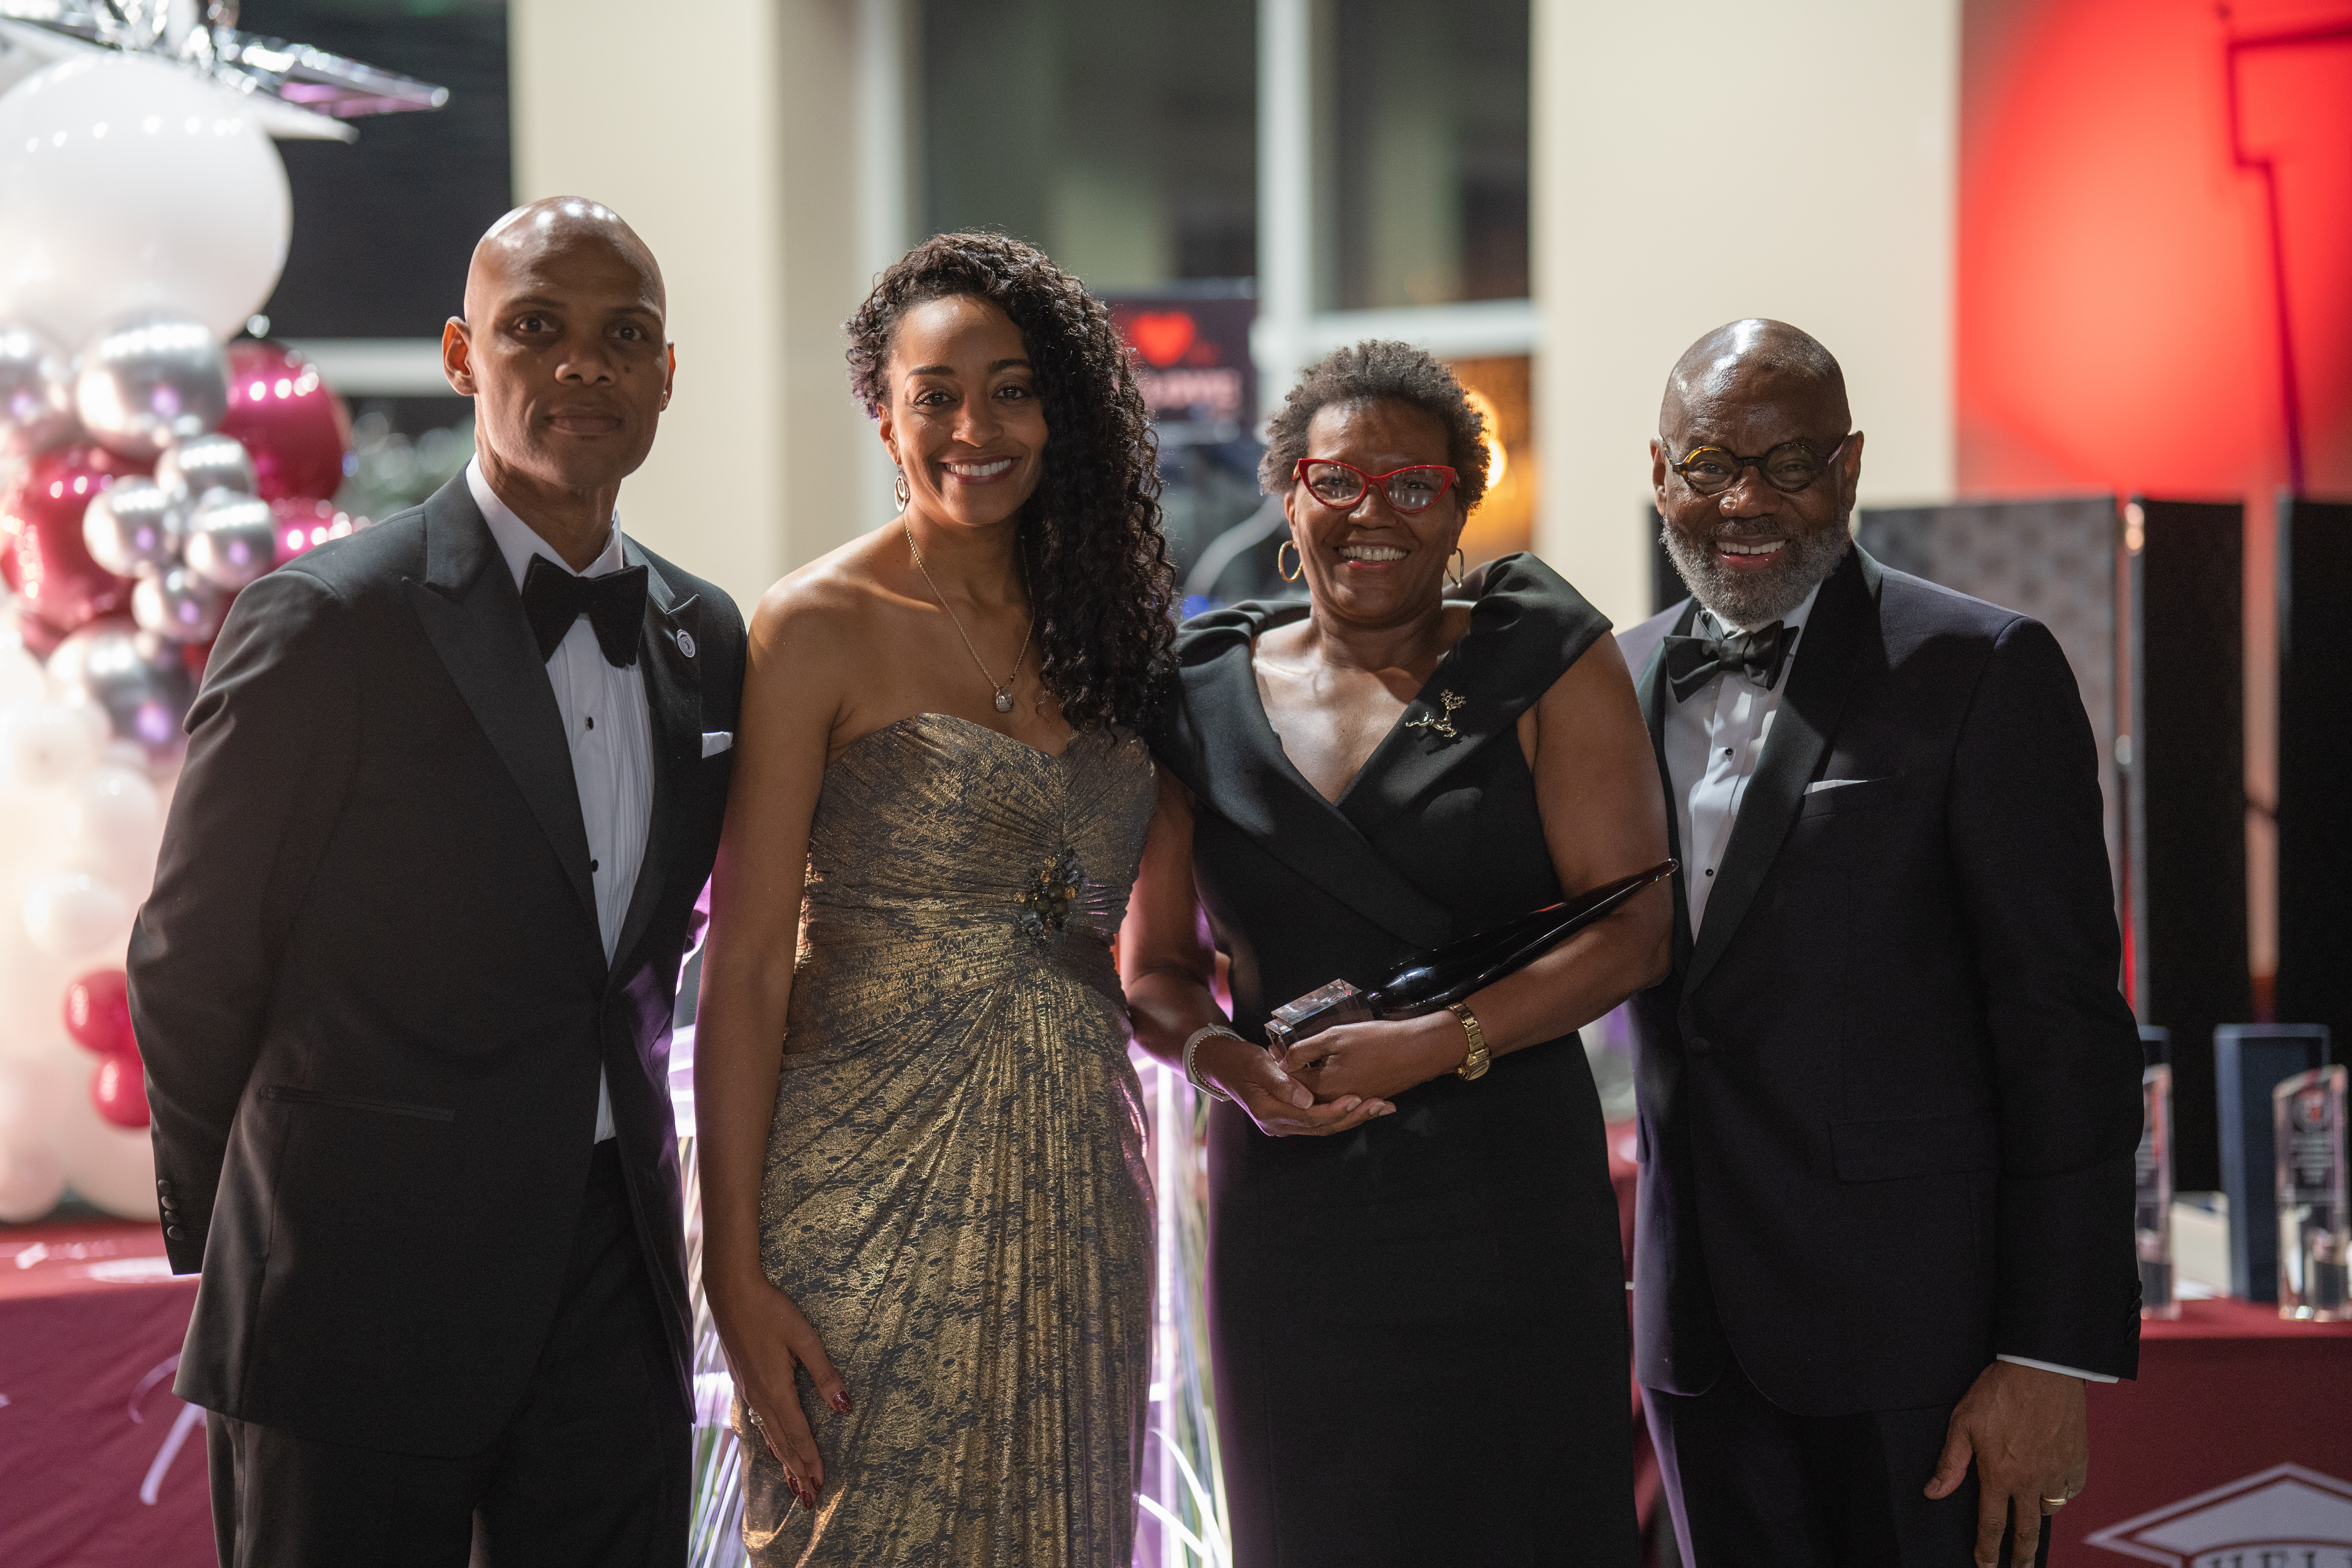 UNCF’s General Counsel Receives Higher Education Leadership Foundation’s 2022 Vanguard Award